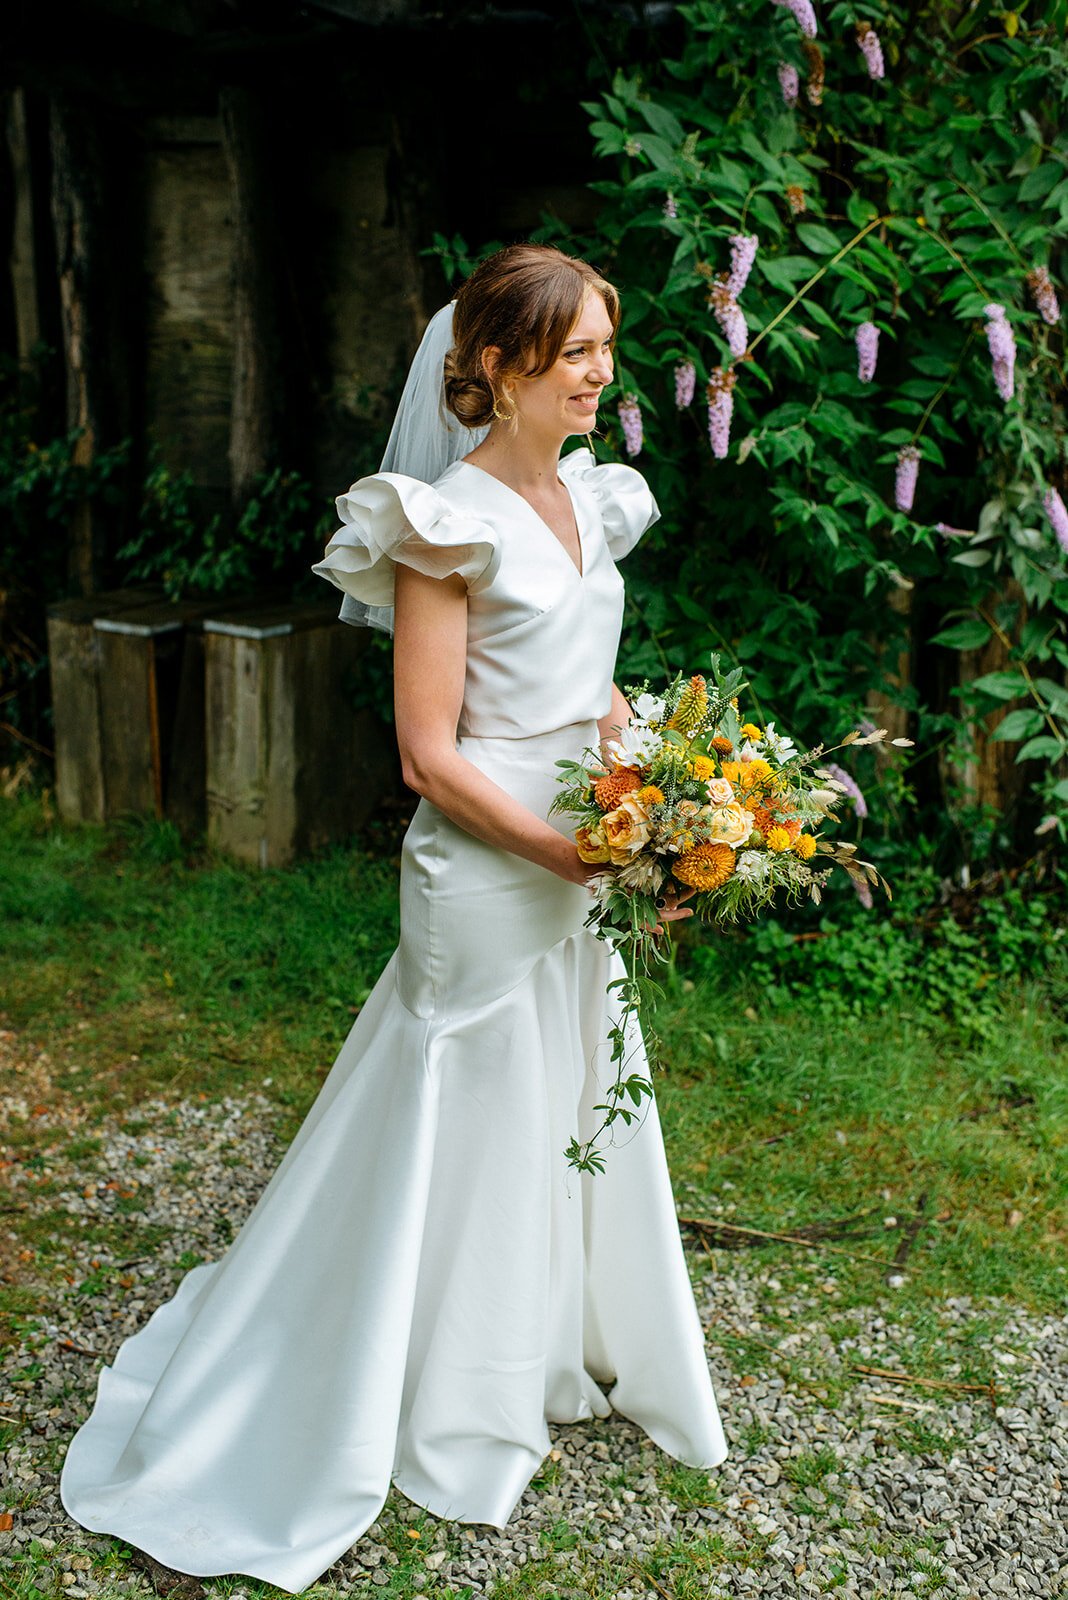 Beautiful bride Steph wore the George top and skirt by Halfpenny London for her wedding day